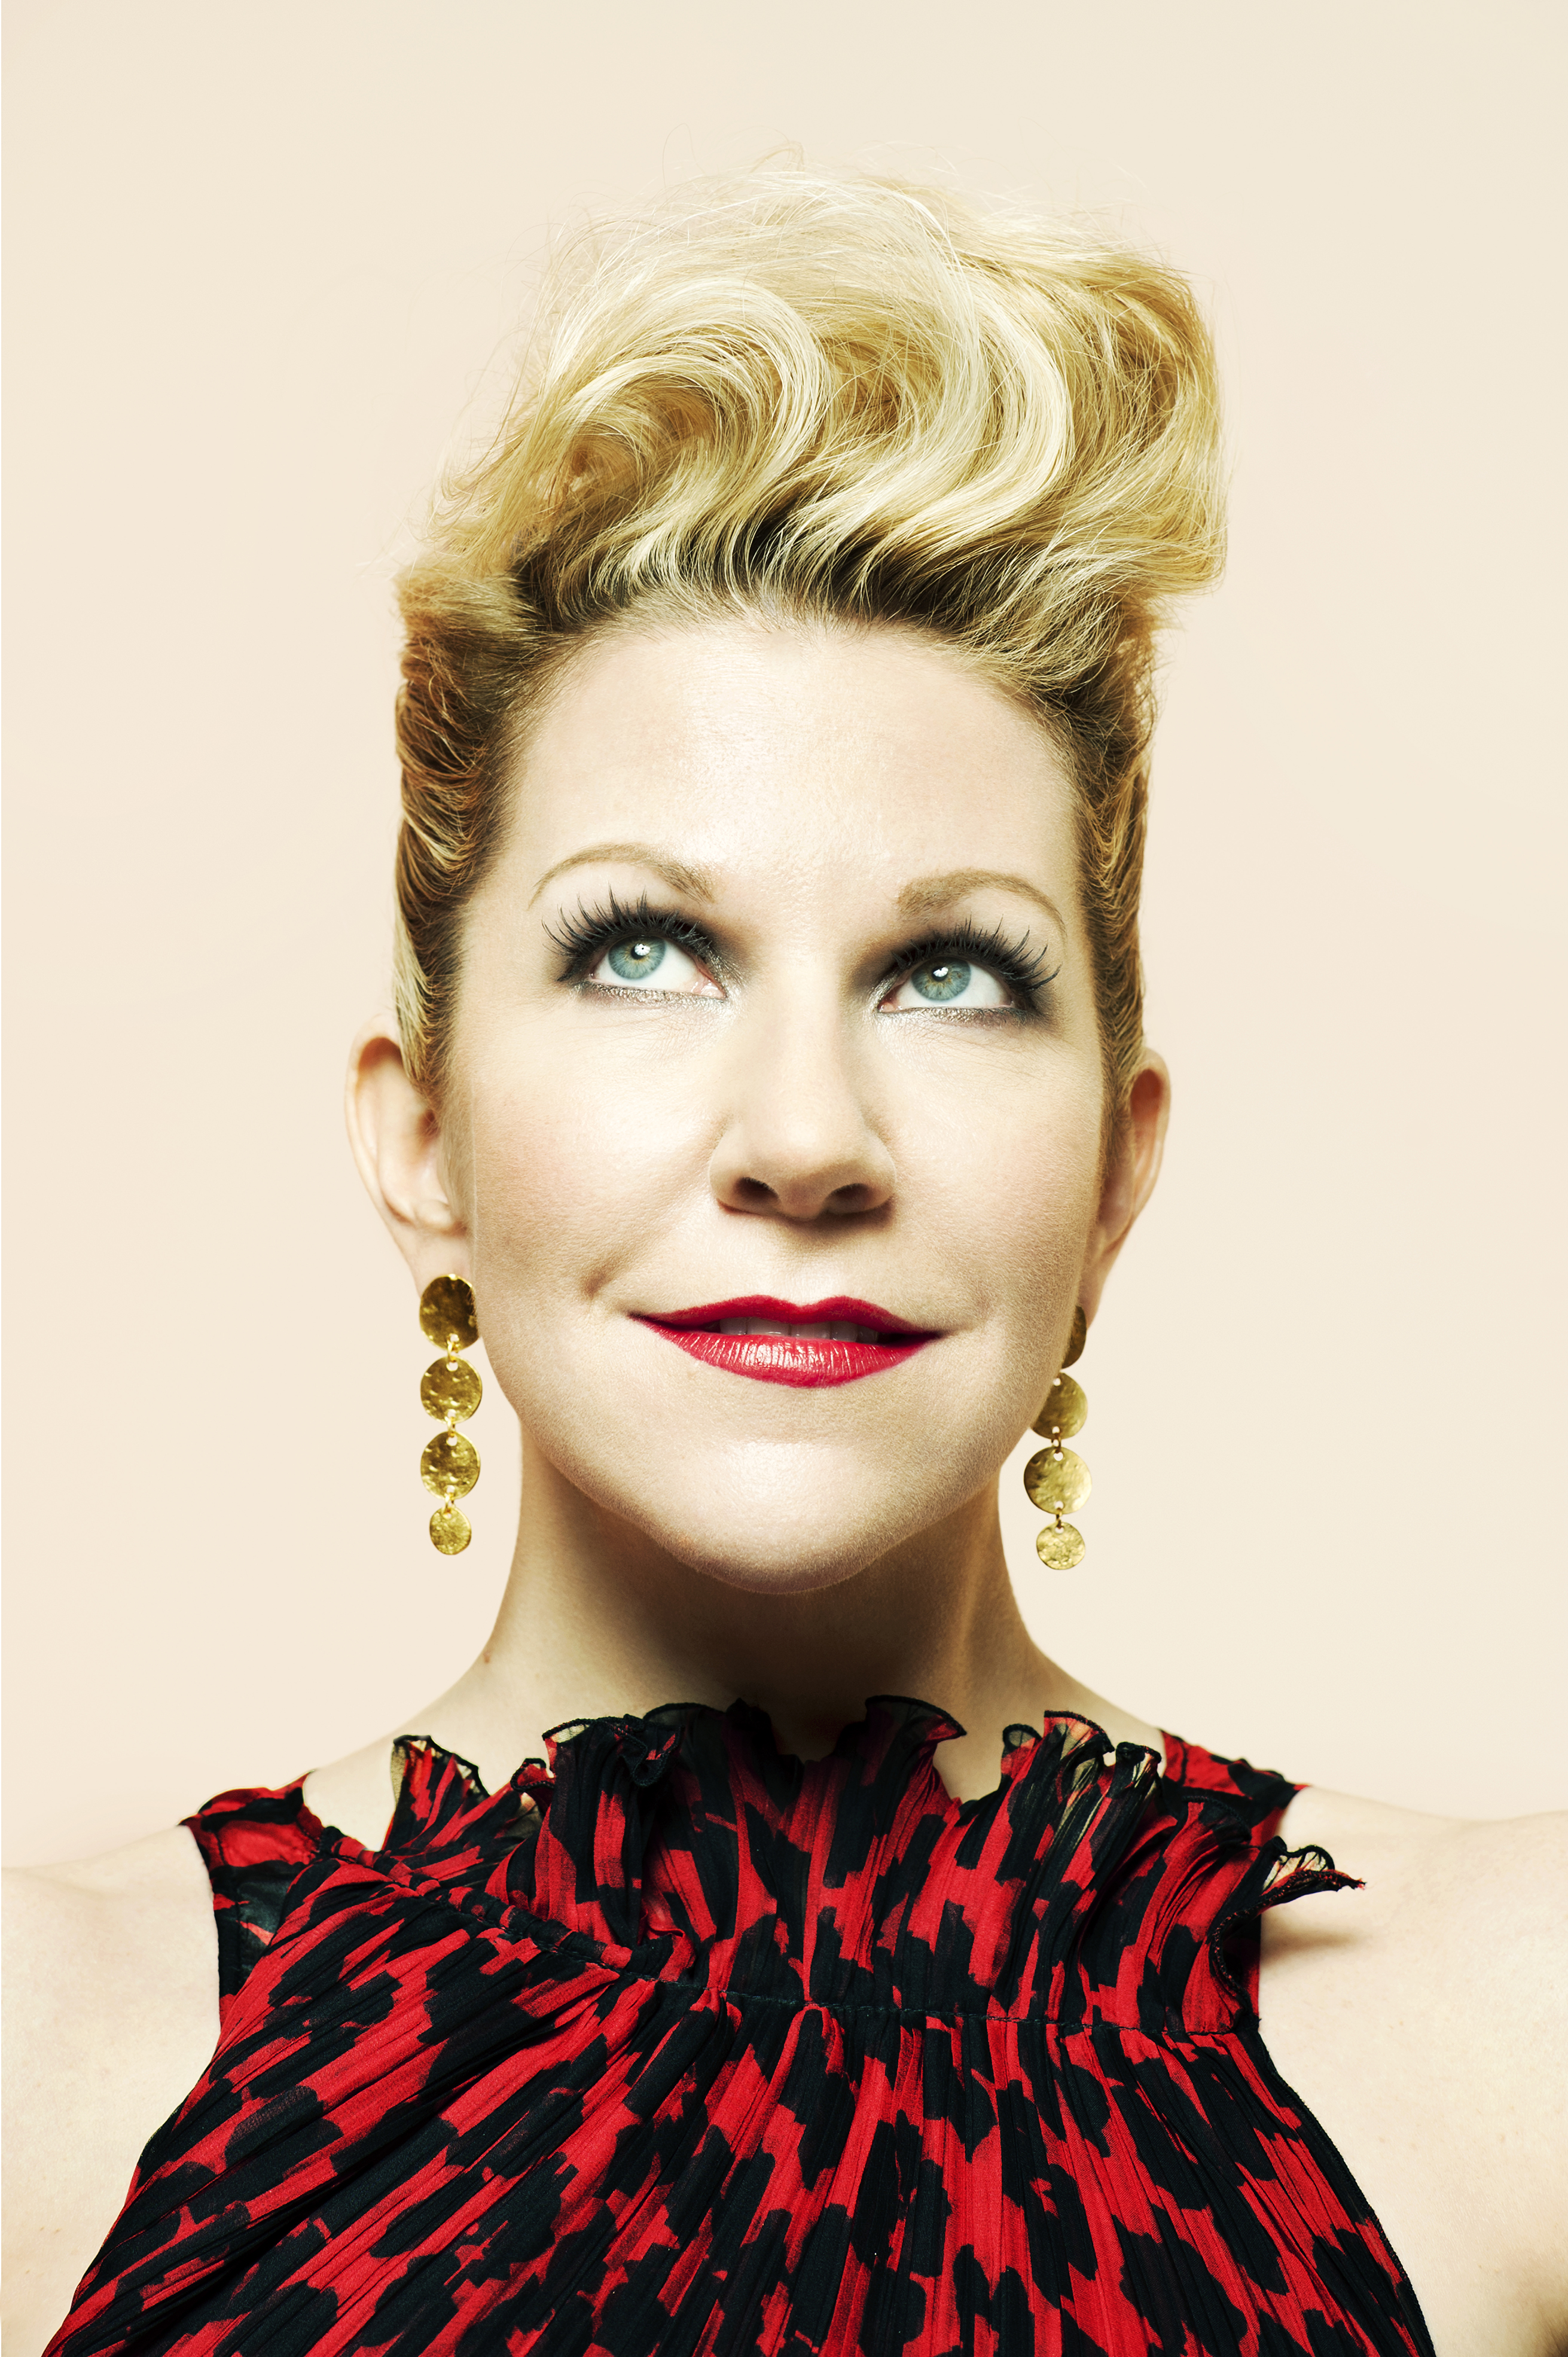 Joyce DiDonato conducted a master class with vocal performance students on Wednesday, Sept. 21, followed by her performance on Thursday, Sept. 22. Kansas native DiDonato said she remembers what it's like to study music at college. (Pari Dukovic)